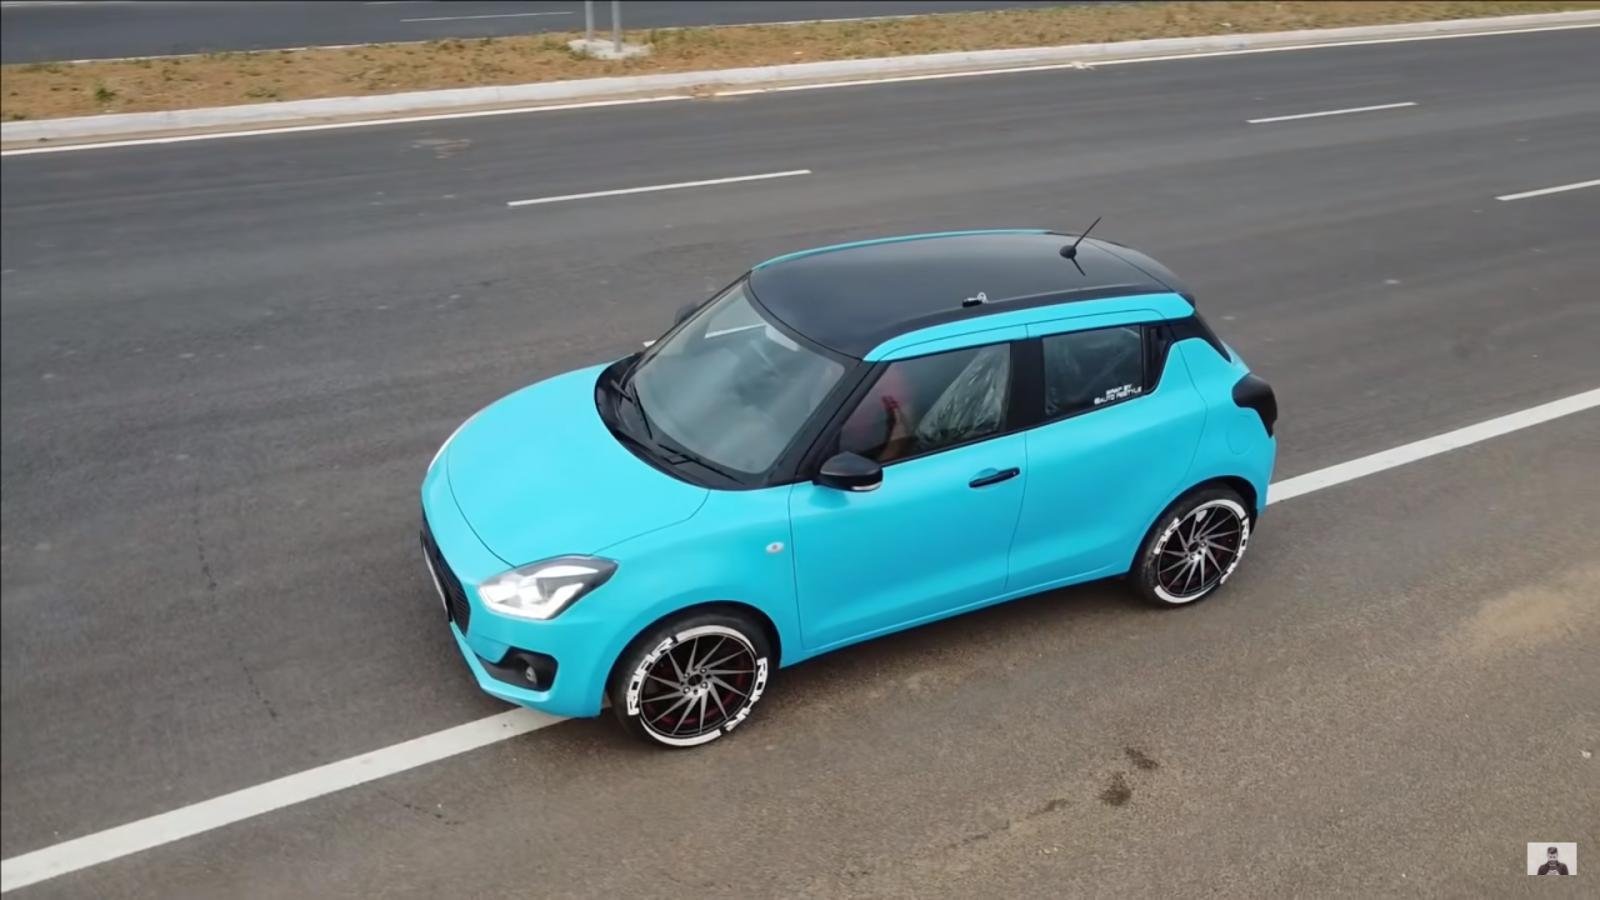 Check Out This Maruti Swift With McLaren Inspired Wrap Job - VIDEO